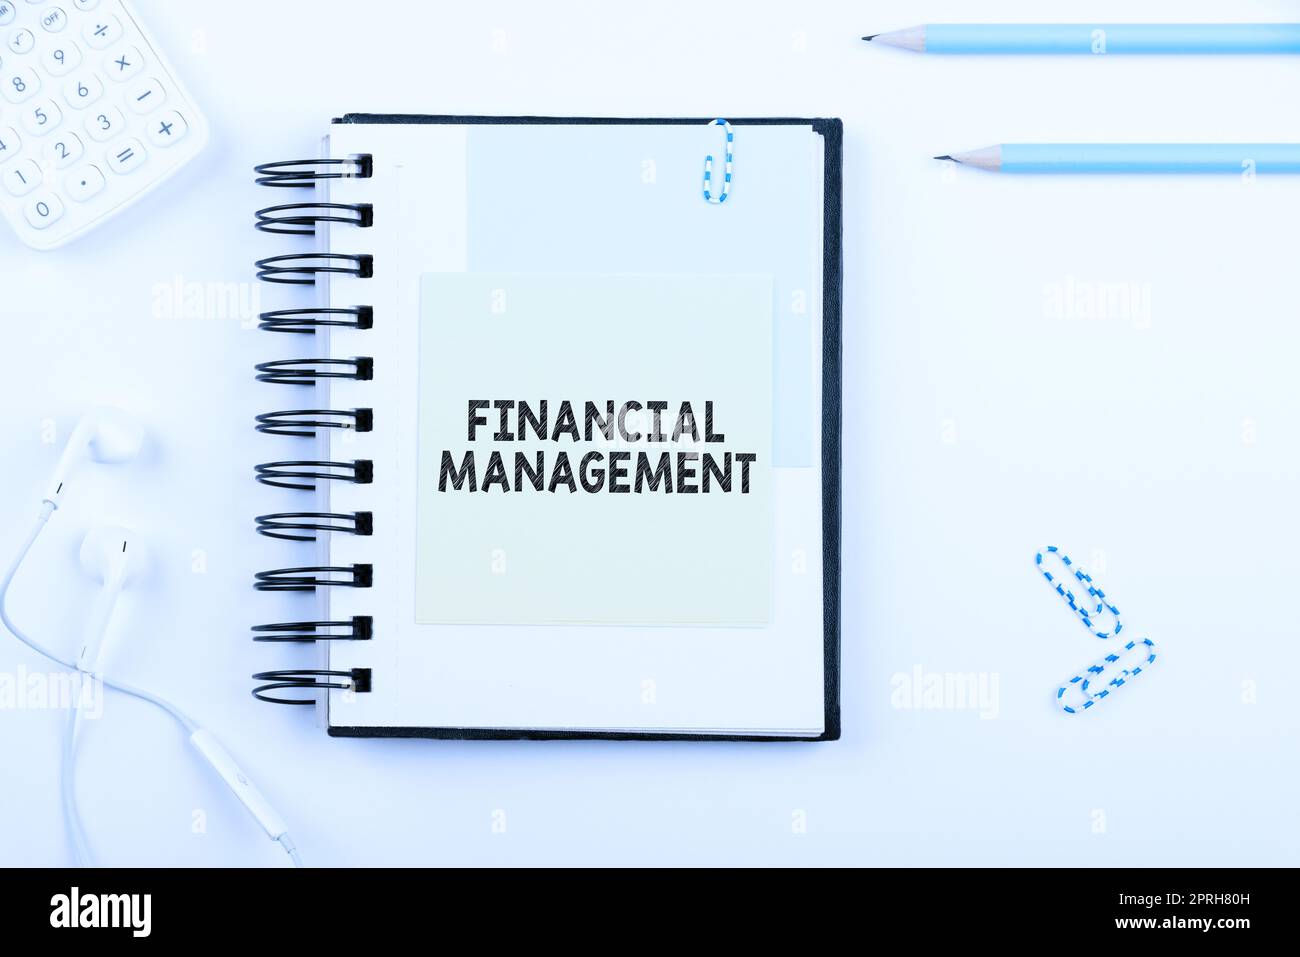 Hand writing sign Financial Management, Business idea efficient and effective way to Manage Money and Funds Stock Photo